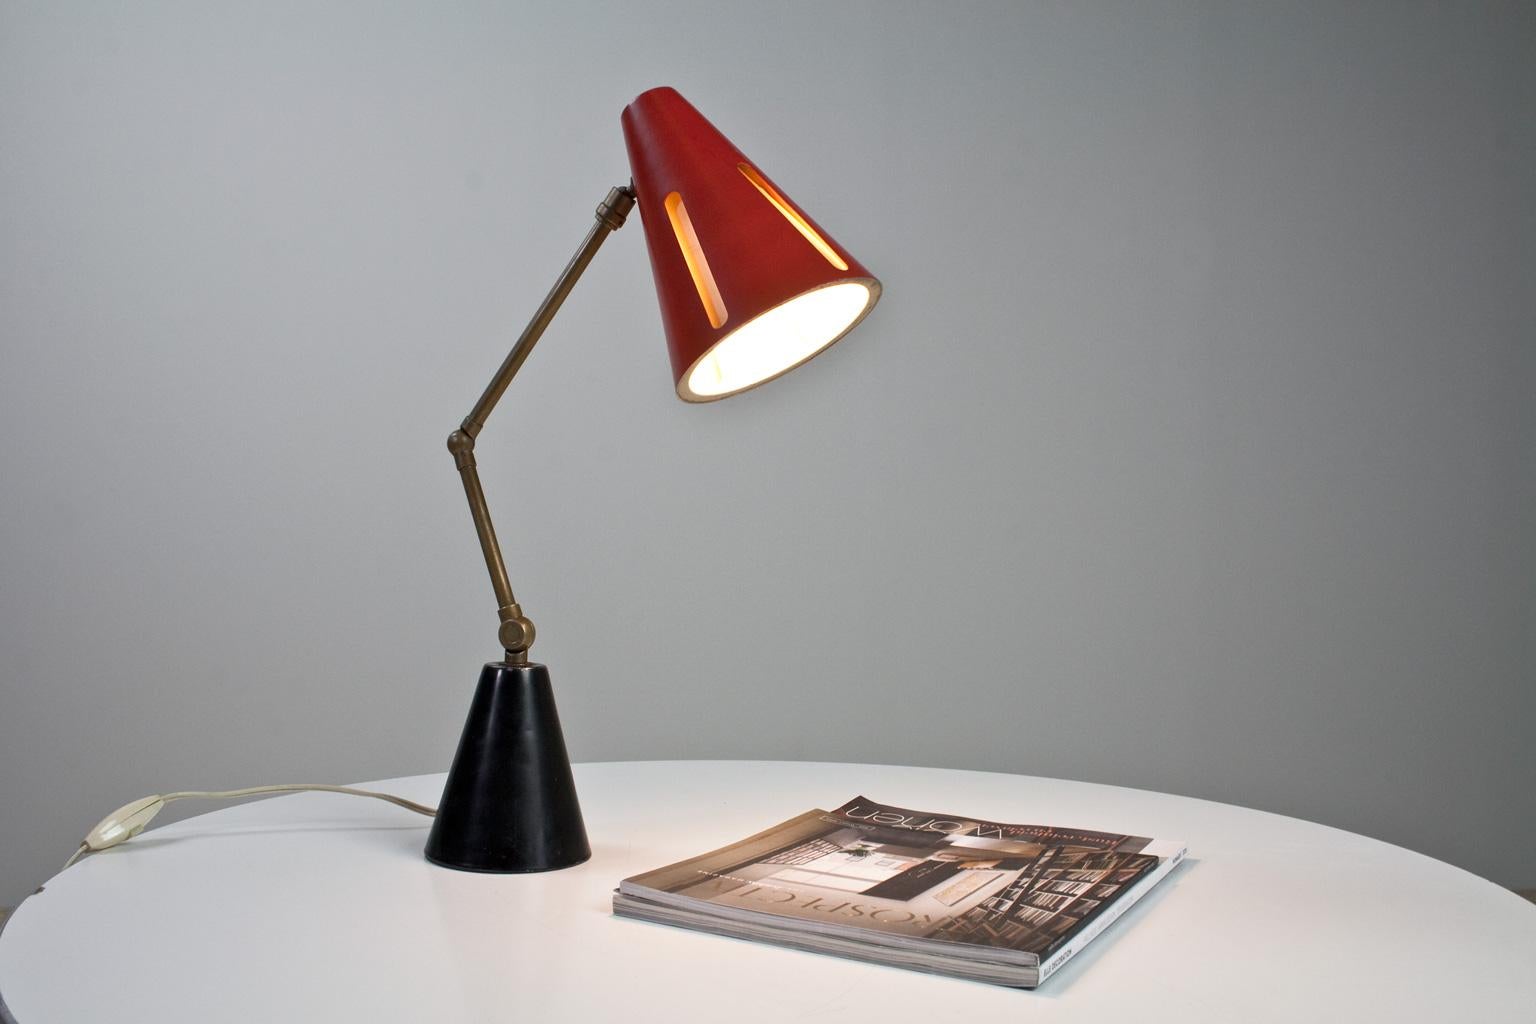 Lacquered Mid-Century Modern Table Light Red and Black by Busquet Hala Sun Series, 1955 For Sale